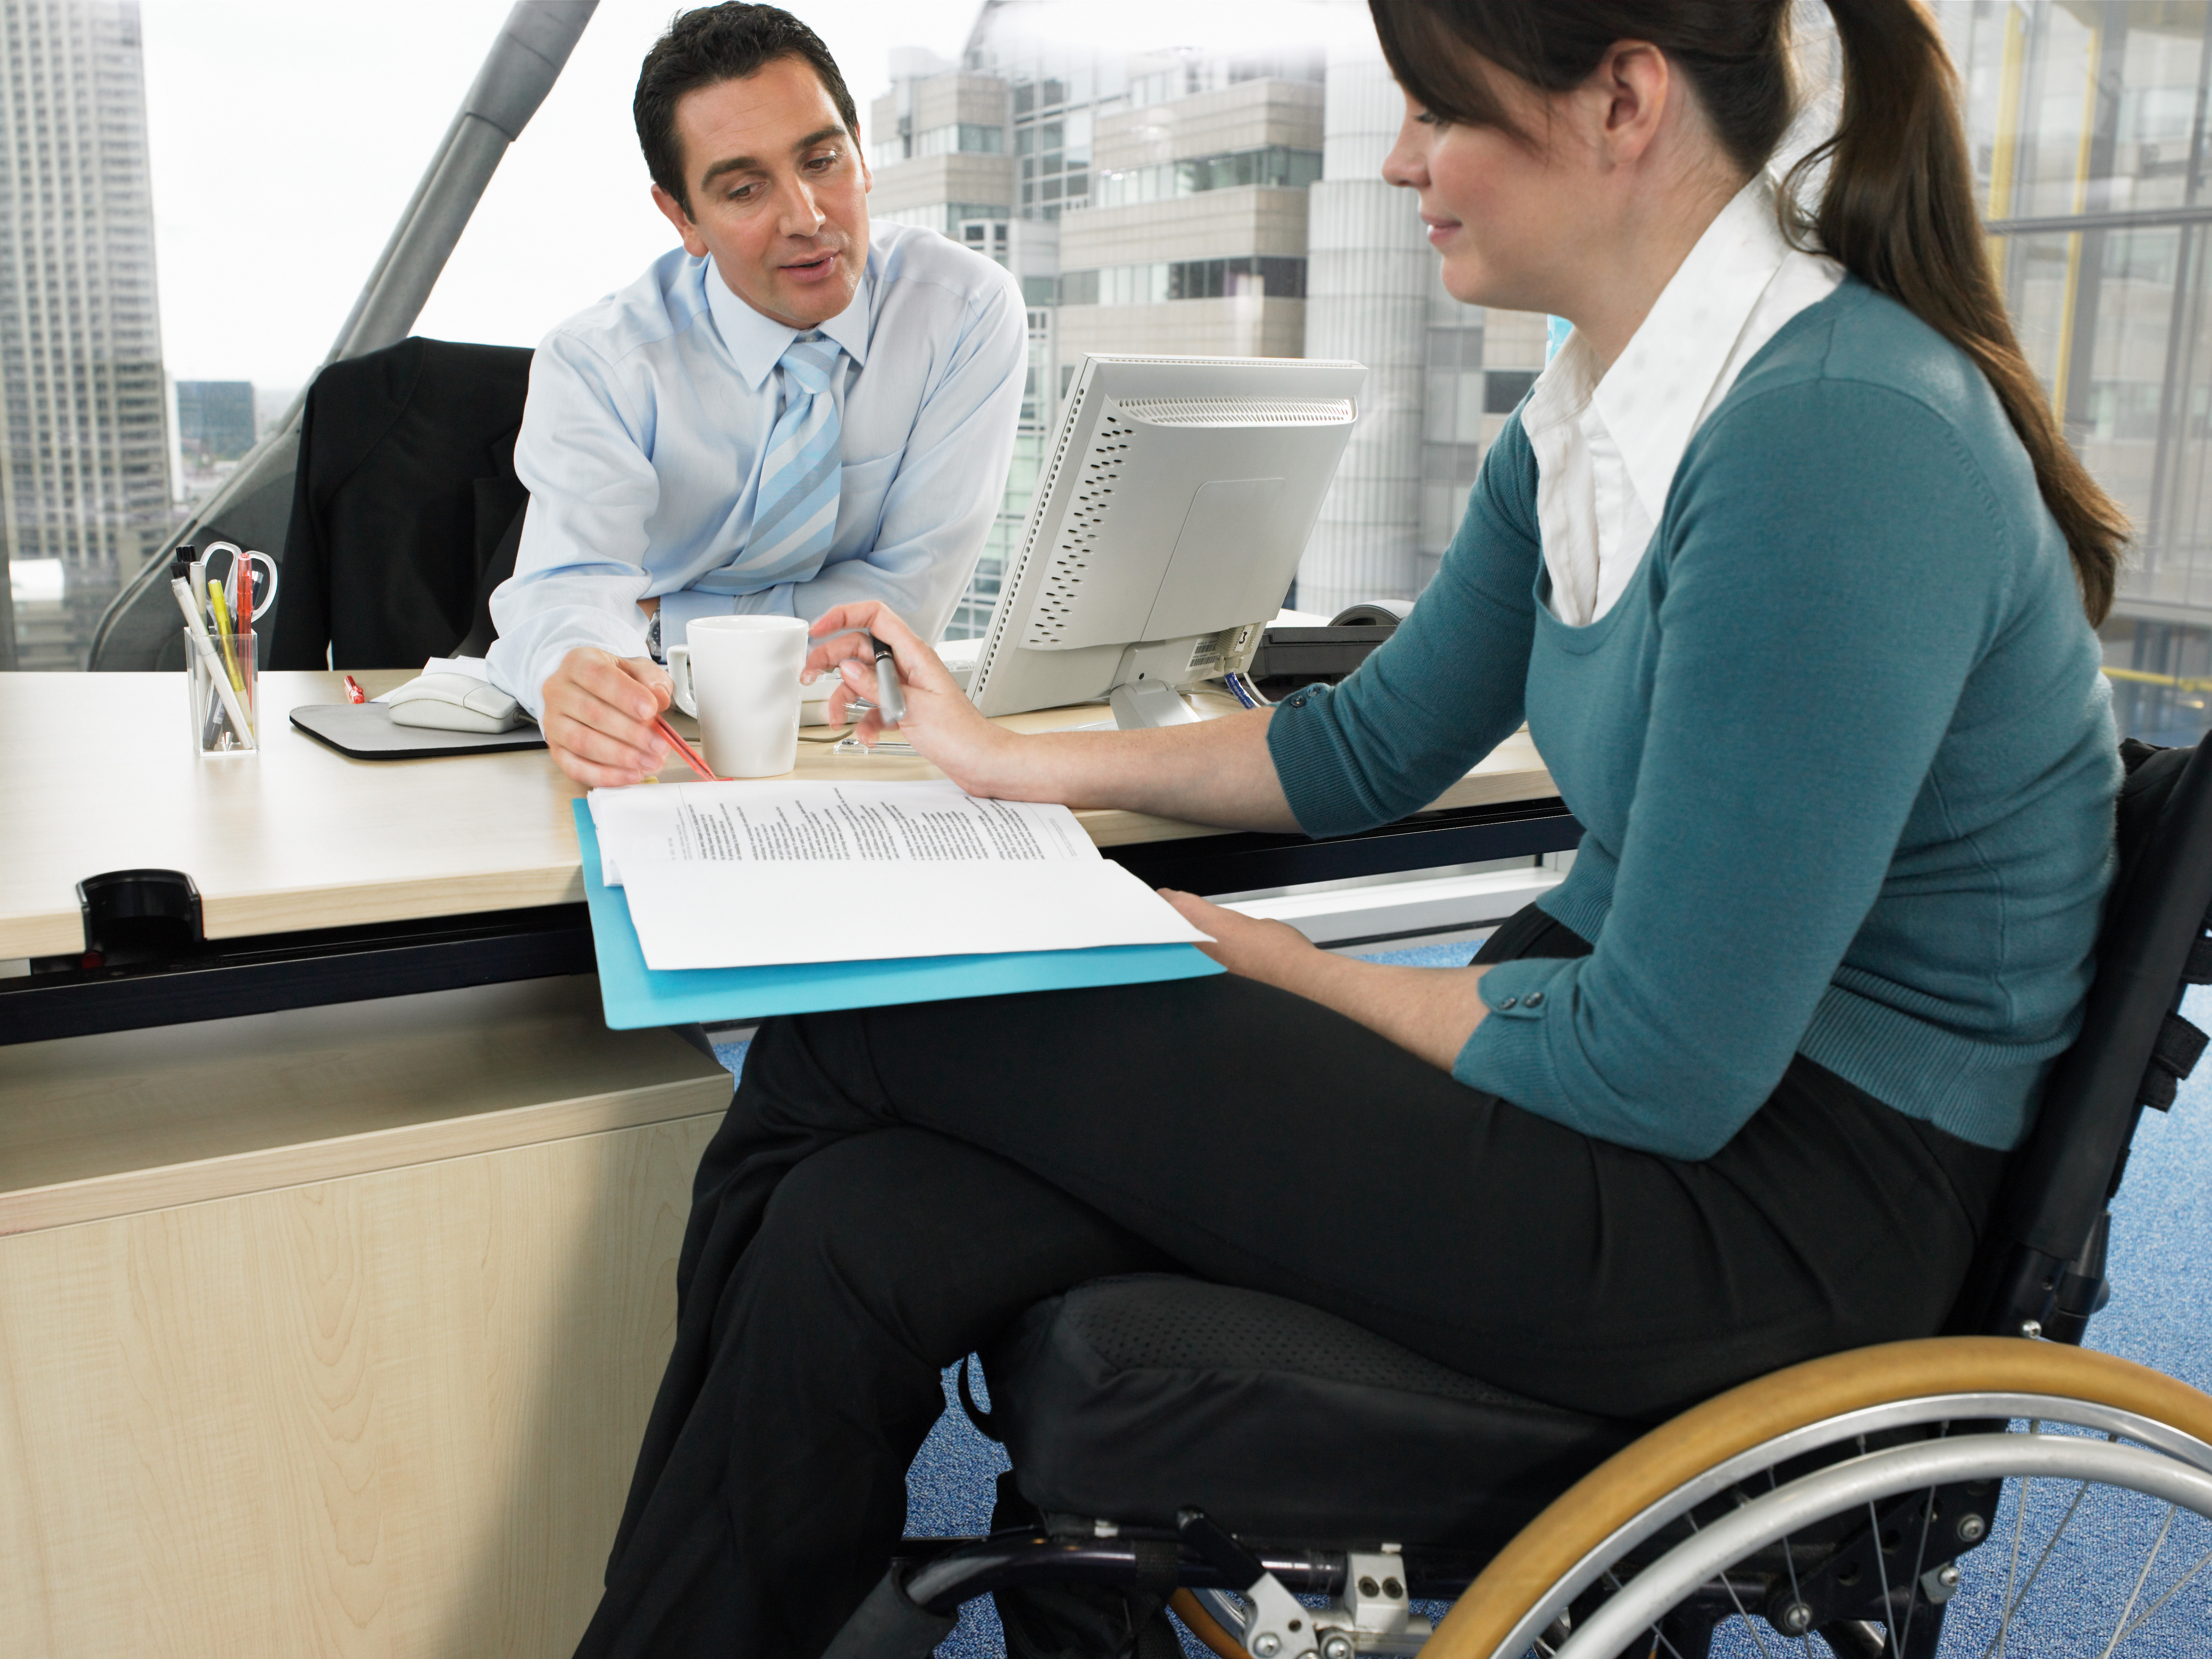 Office workers in meeting. One is a wheelchair user.